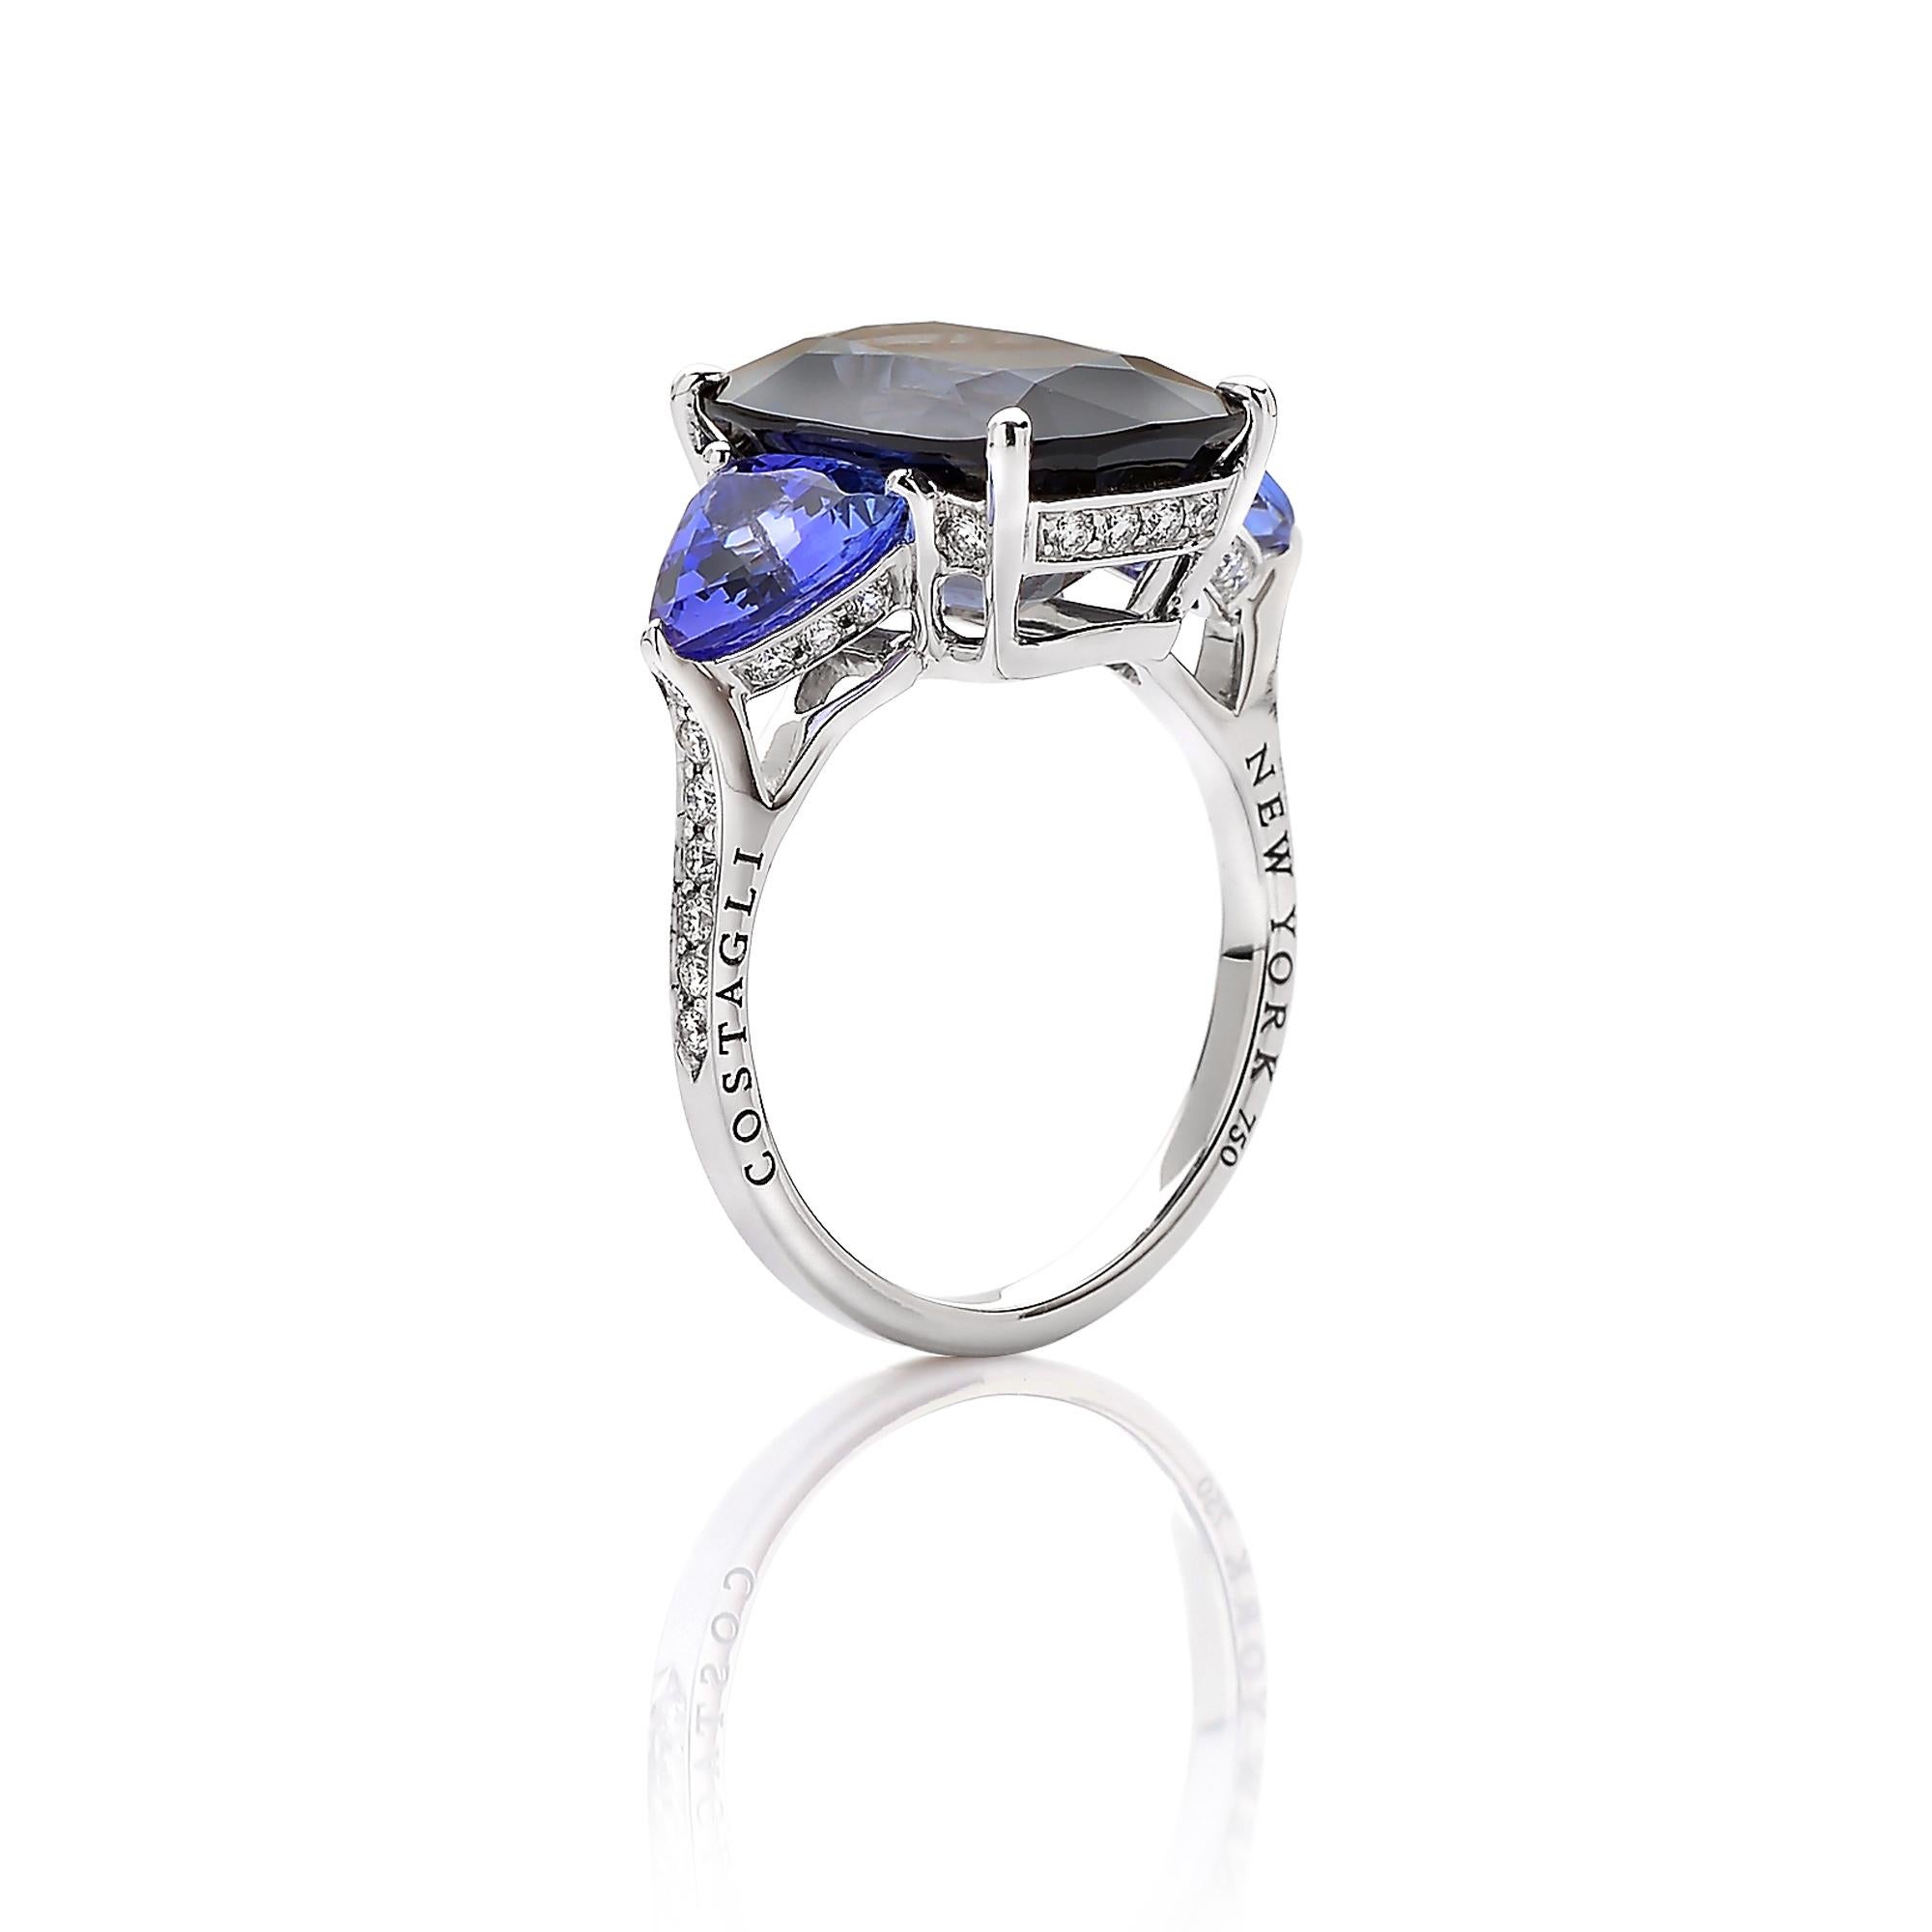 18 karat white gold three-stone ring set with a cushion-cut black spinel flanked by two trillion-cut tanzanites with diamond detail.

Each Paolo Costagli contemporary engagement ring is a one of a kind, handcrafted testament to your love story. The